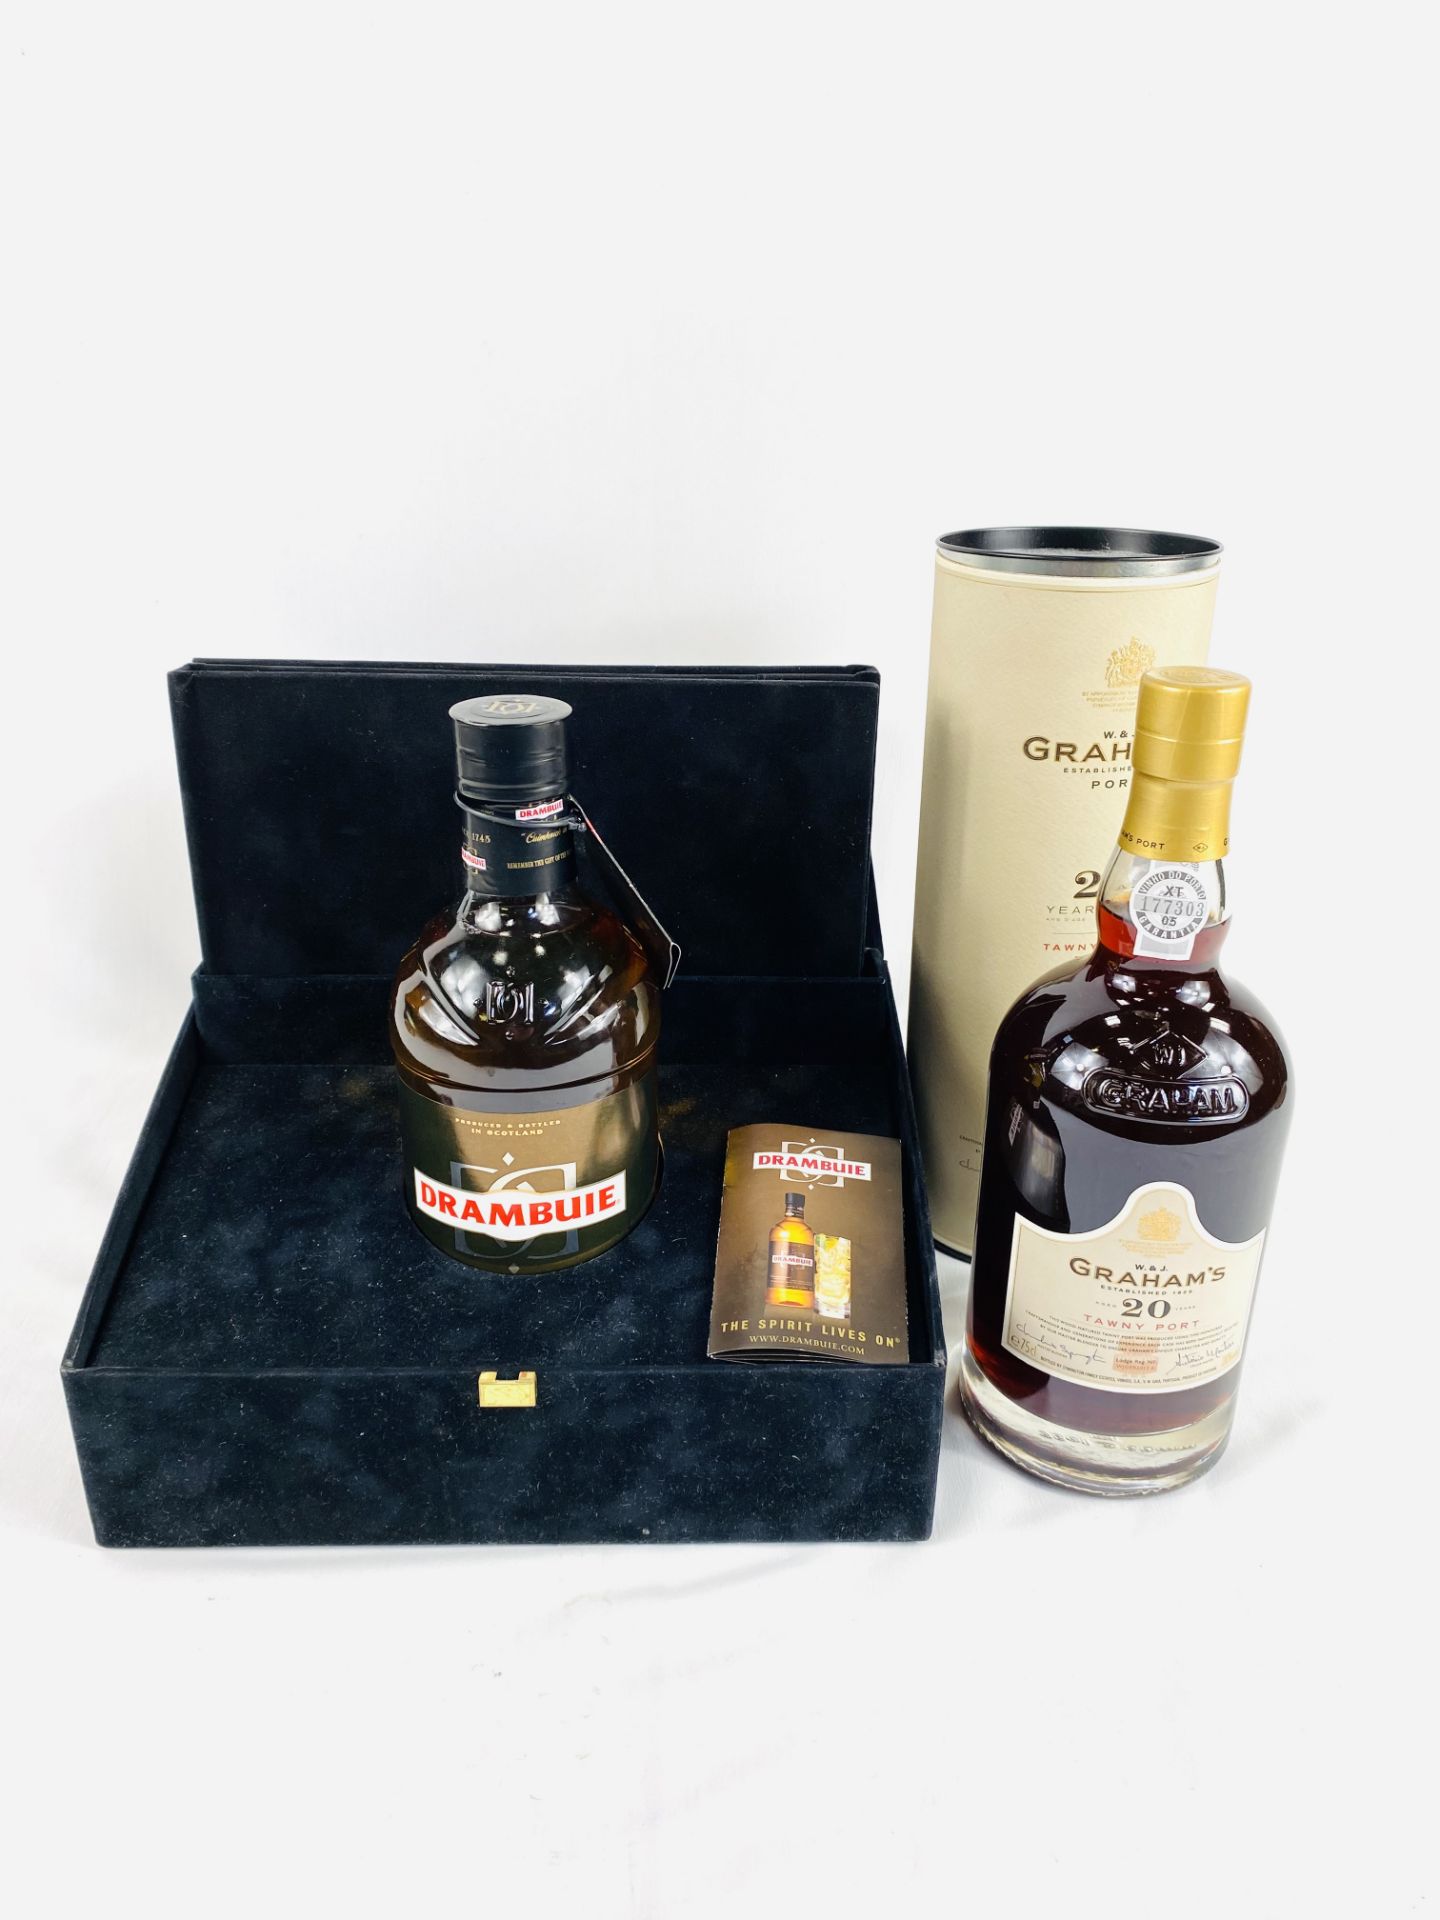 Bottle of Drambuie in presentation box together with a bottle of port